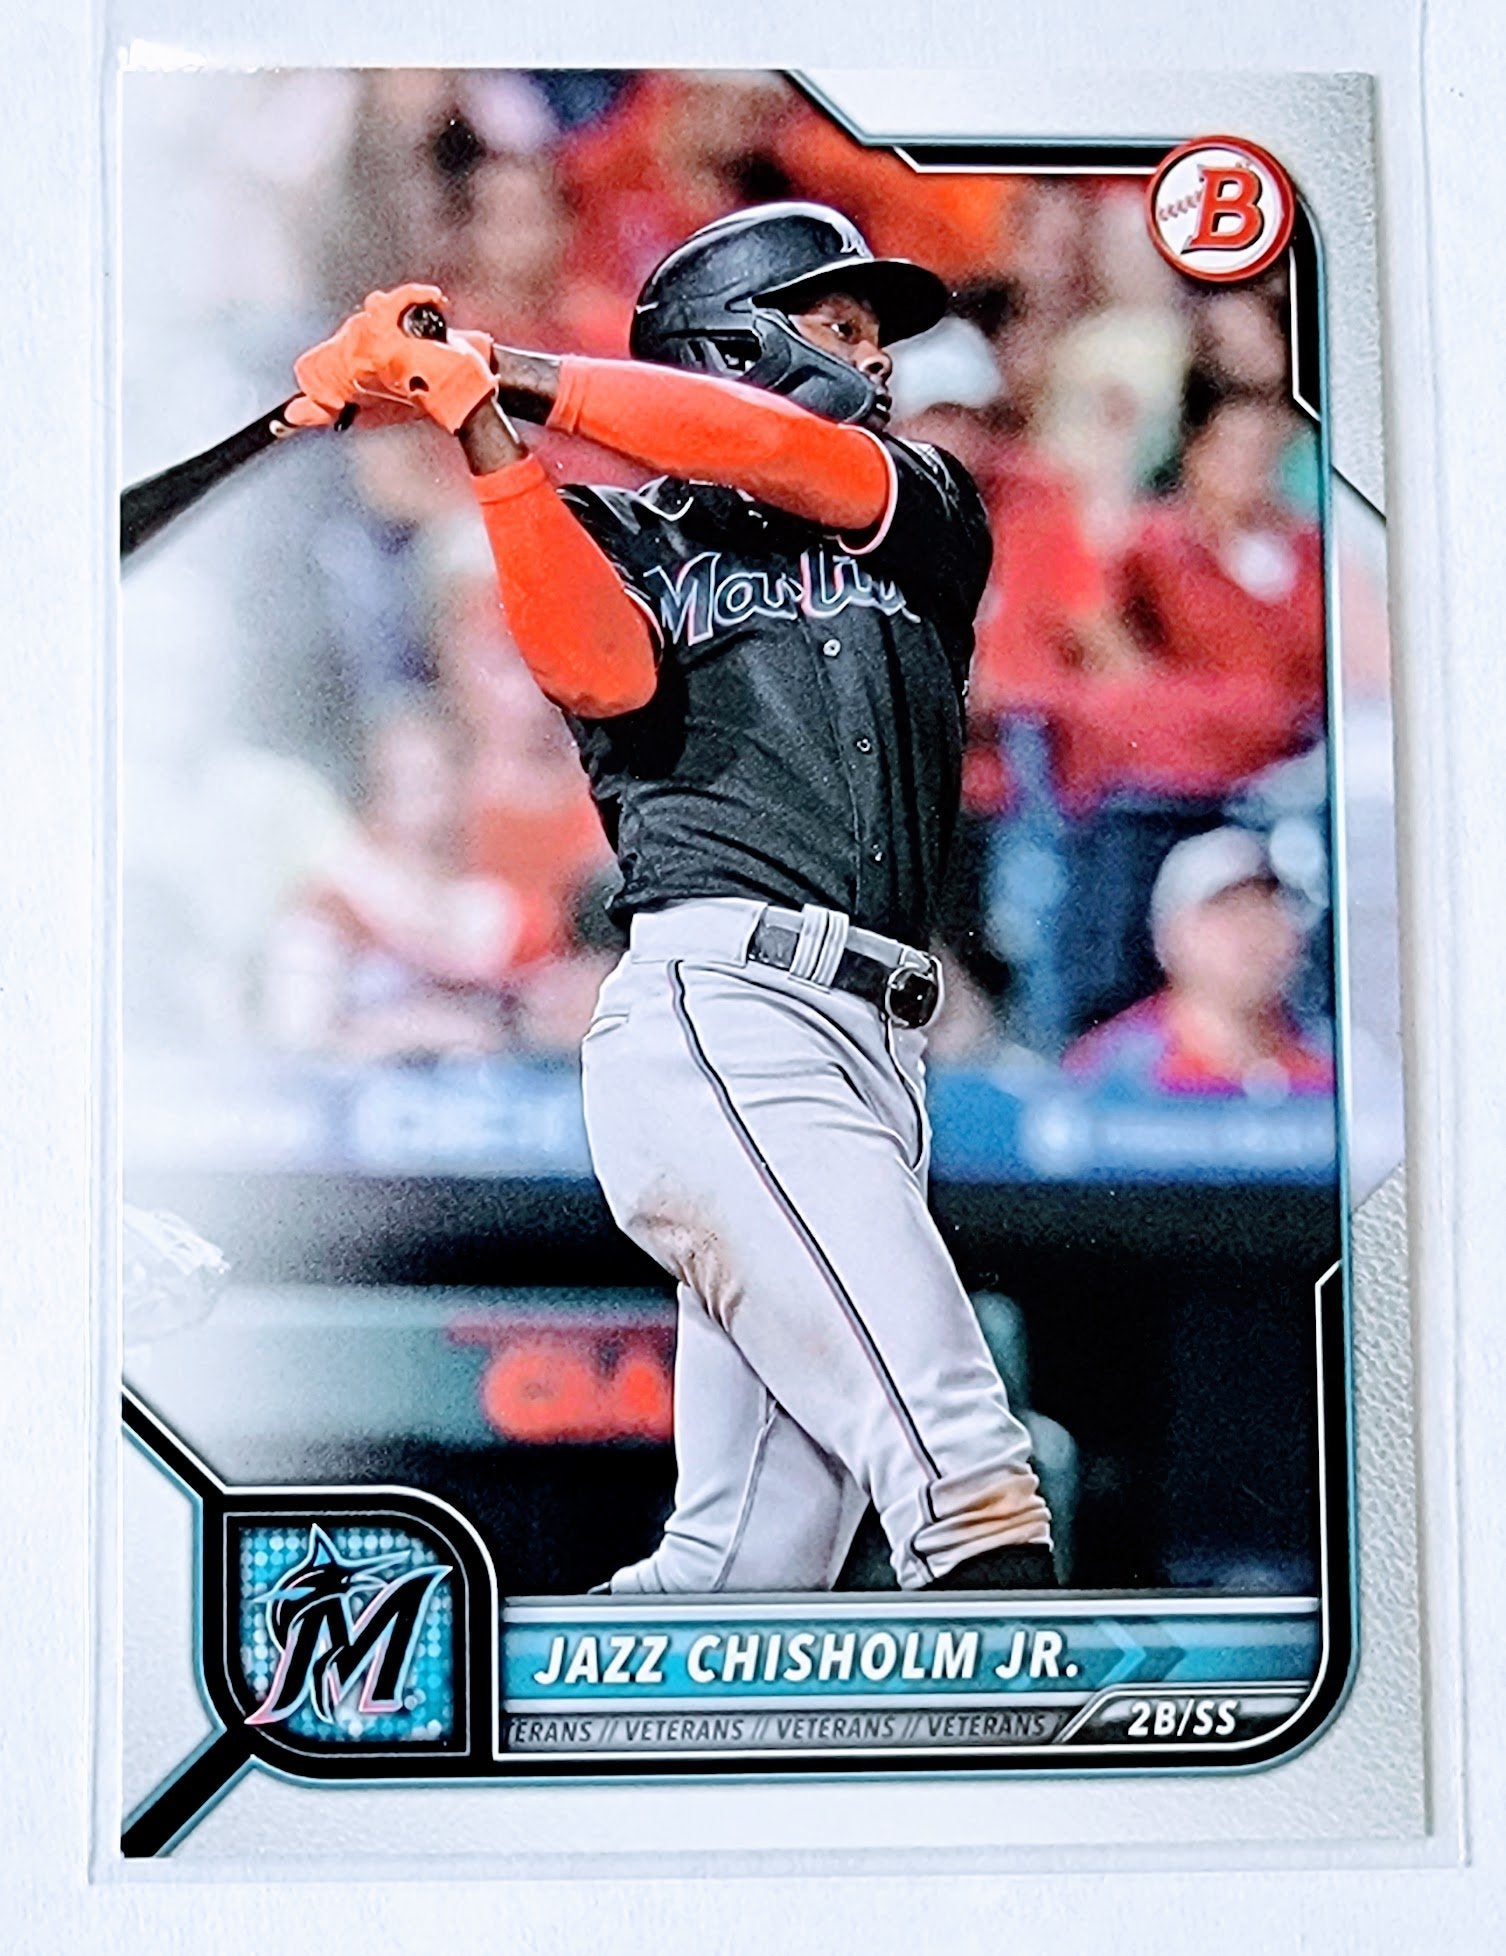 2022 Bowman Jazz Chisolm Jr Baseball Trading Card SMCB1 simple Xclusive Collectibles   